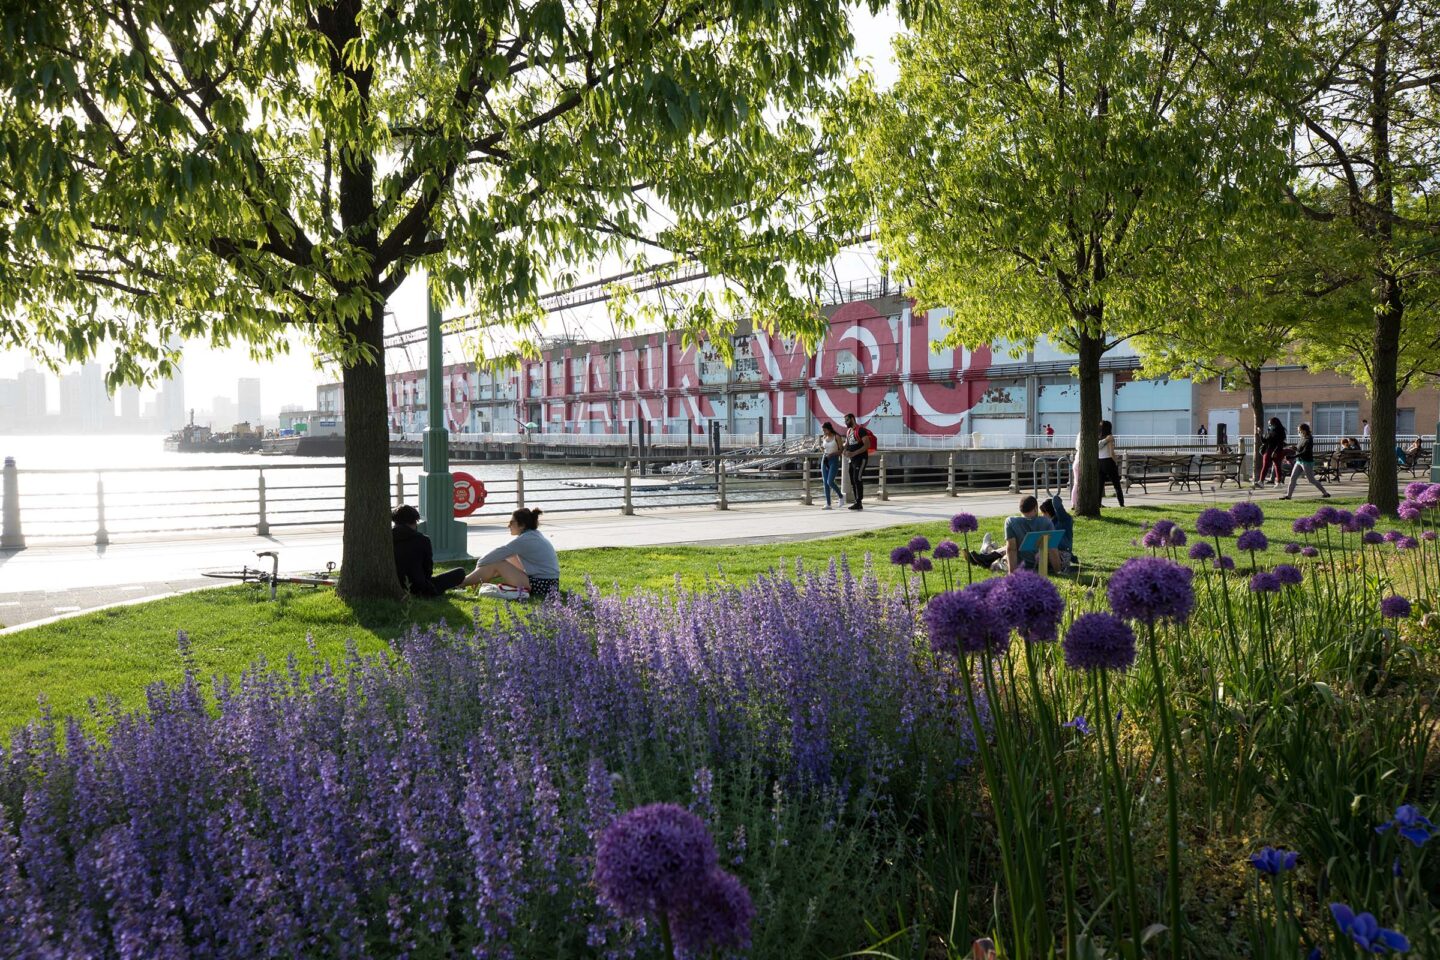 Park visitors enjoy lounging on the lawns in Tribeca in Hudson River Park